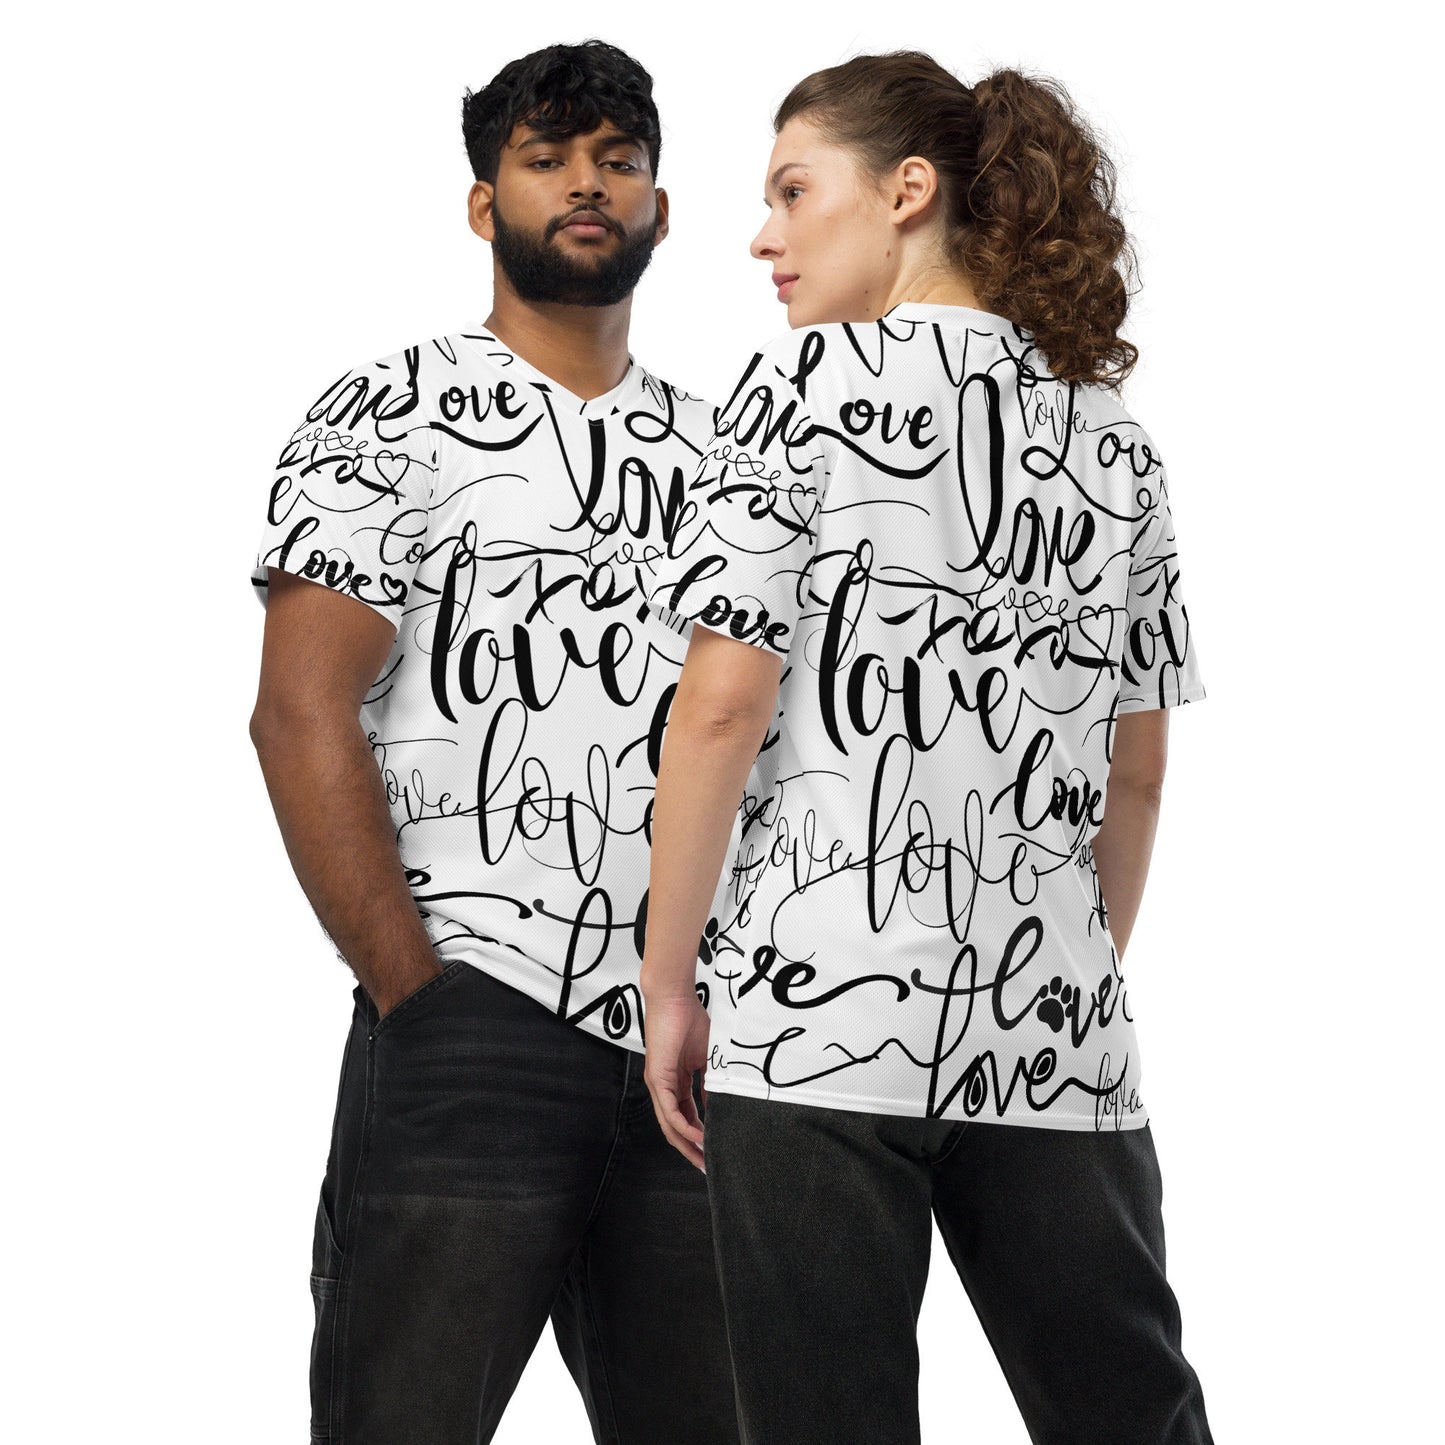 Love Love Love T-shirt/All Over Print Tee/Rave Party Shirt/Festival Clothing/Trippy Love Shirt/Oversized shirt/Recycled unisex sports jersey